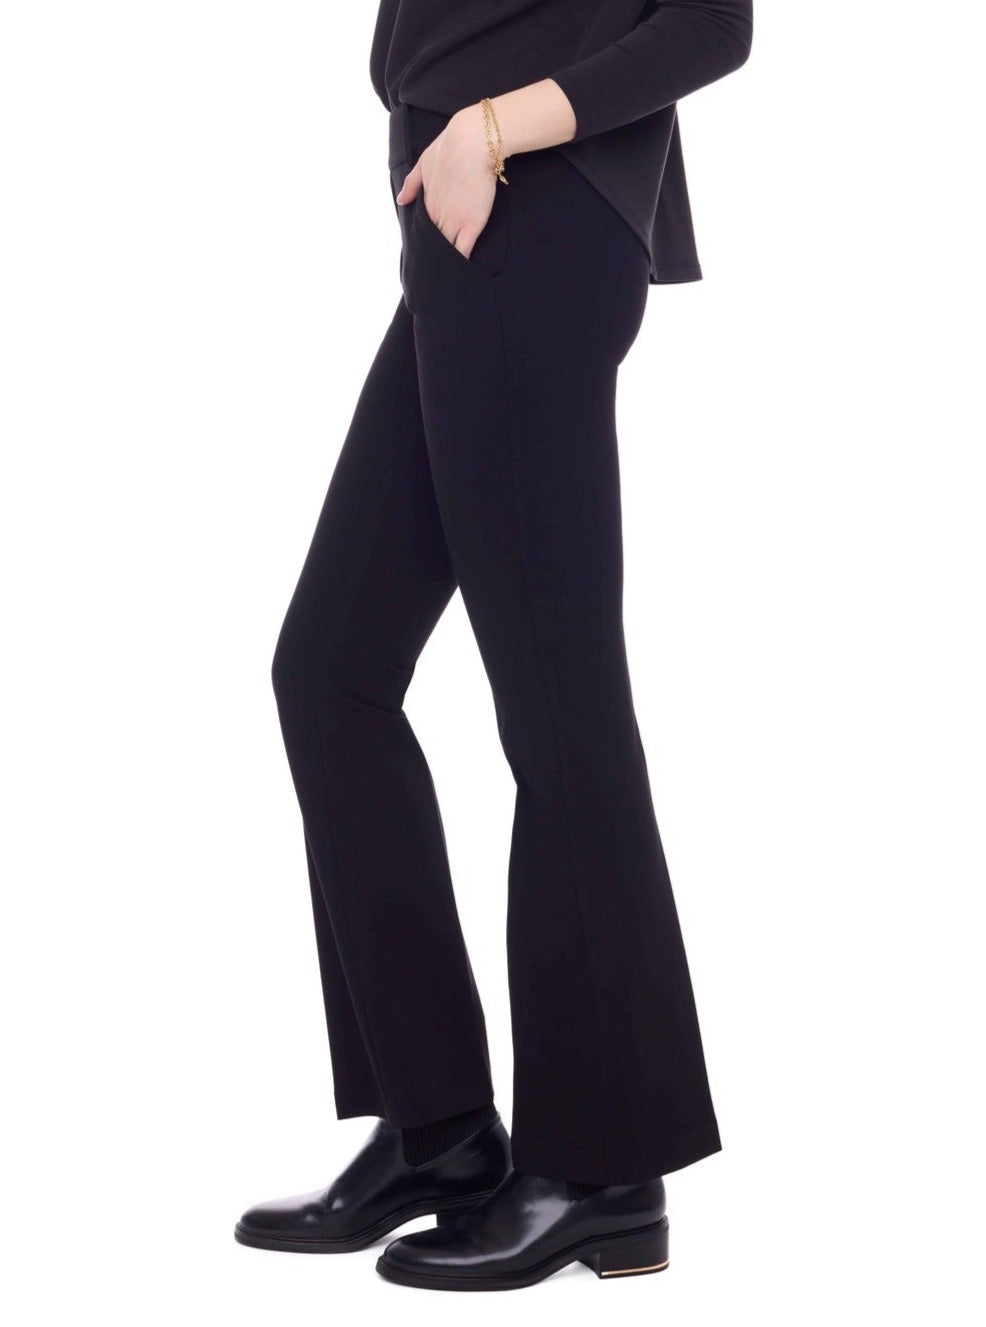 I Love Tyler Madison Axel Ponte Boot Leg Pant in Black - Size XL Available